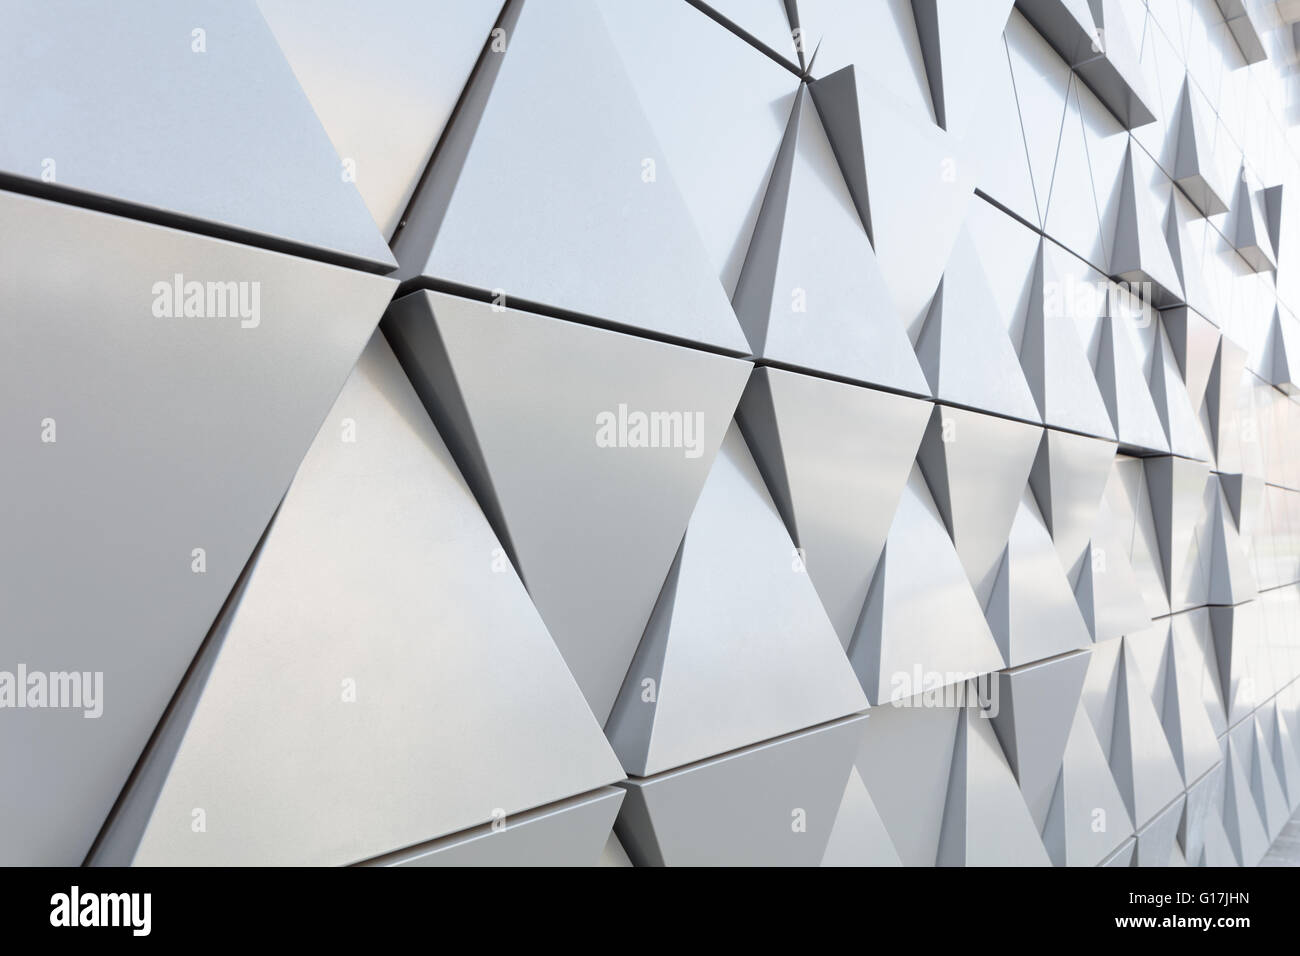 Abstract architectural detail Stock Photo